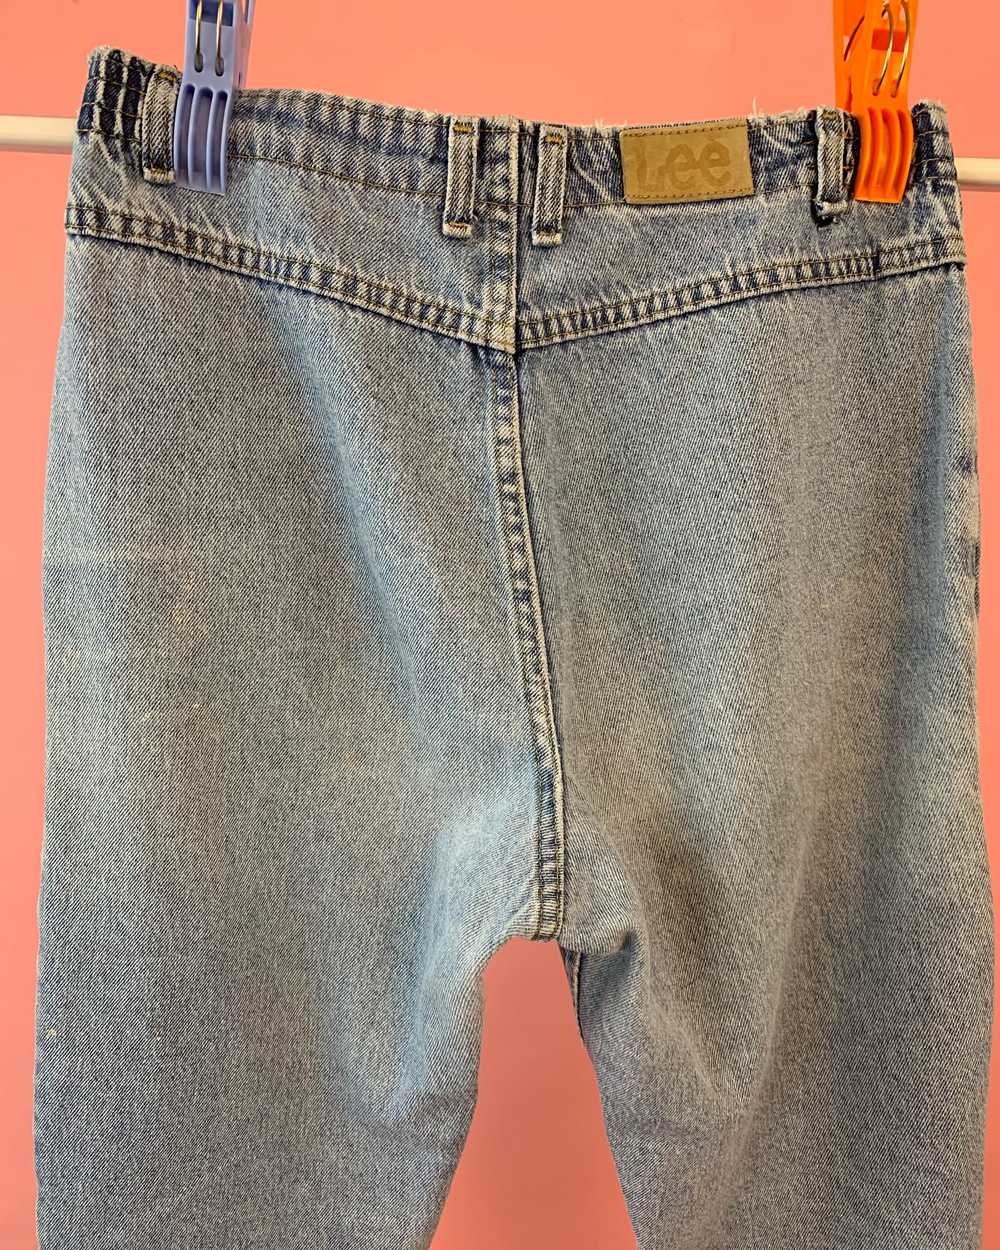 90’s extreme high waisted jeans - image 12